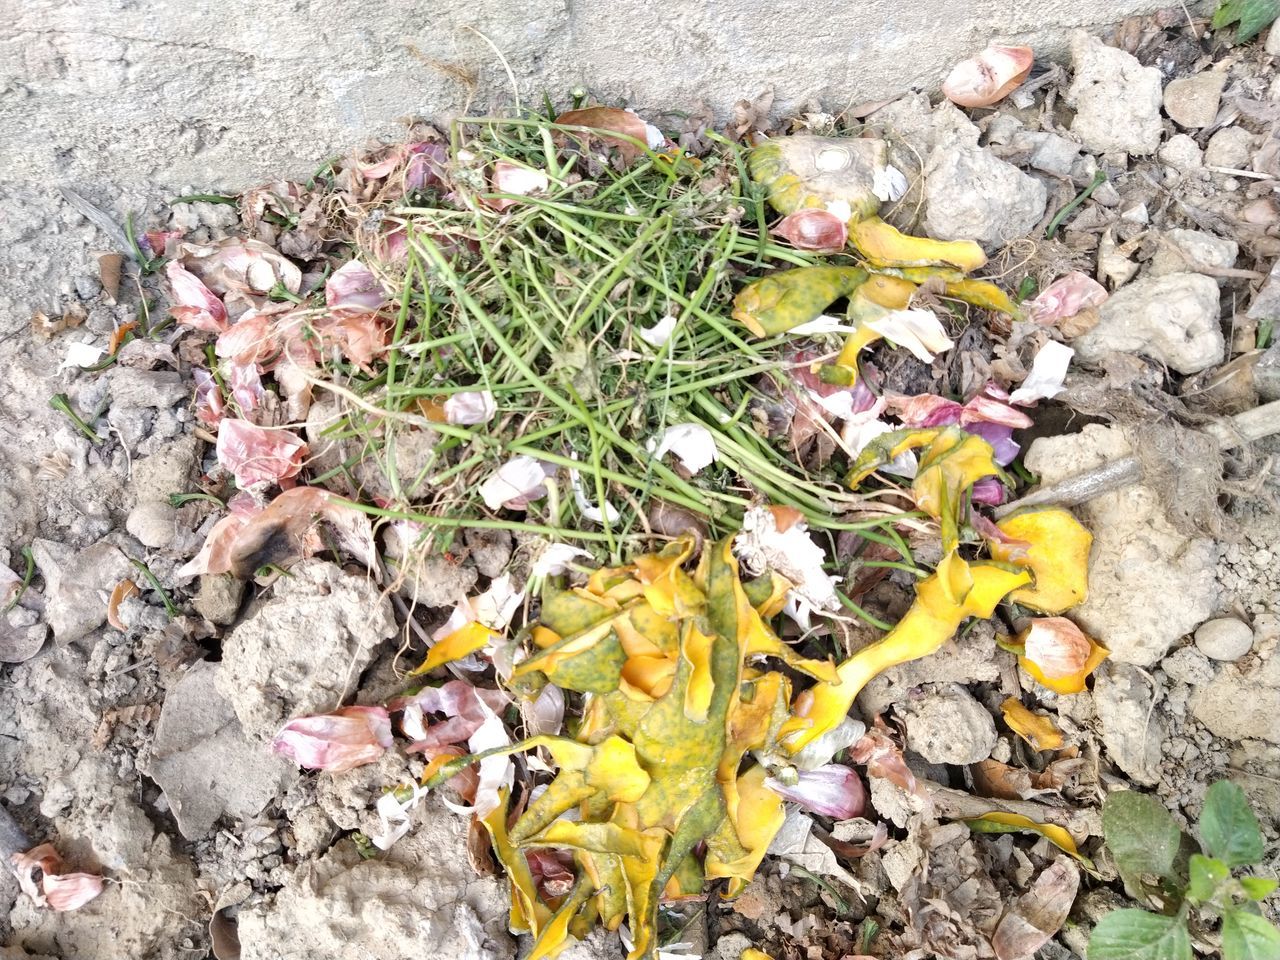 HIGH ANGLE VIEW OF YELLOW FLOWERING PLANTS ON GARBAGE